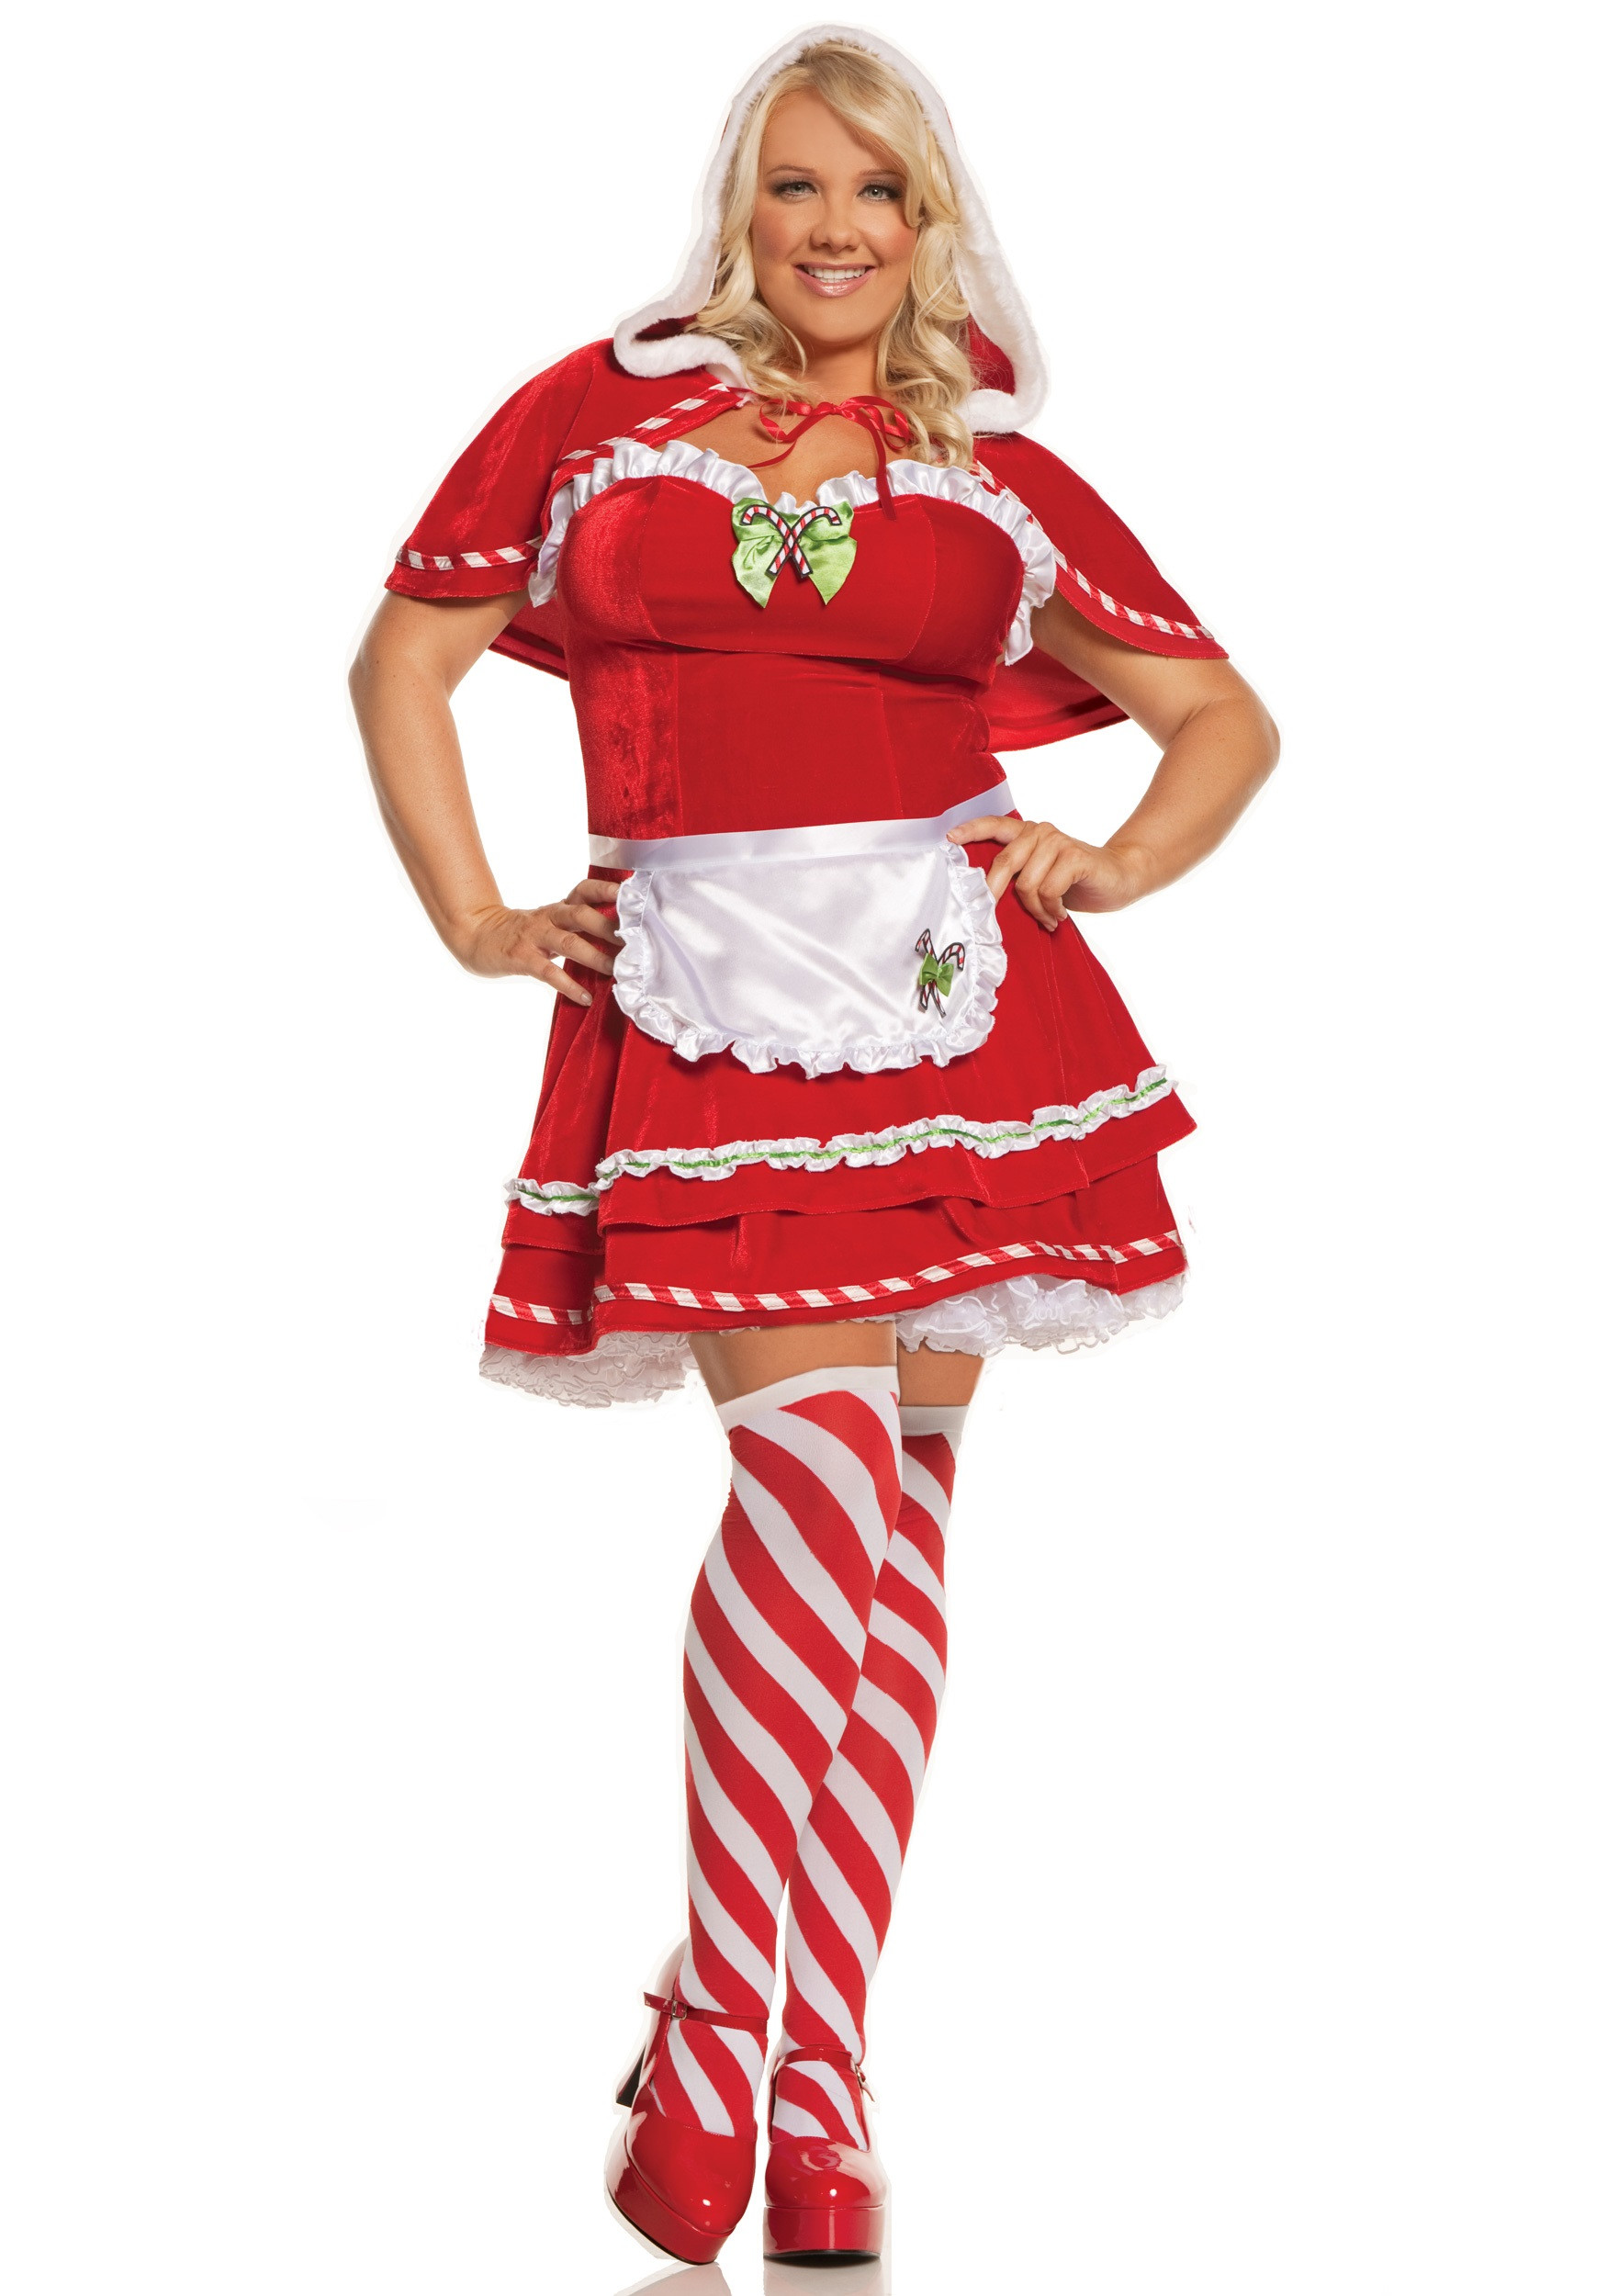 Christmas Candy Cane Costume
 Plus Miss Candy Cane Costume